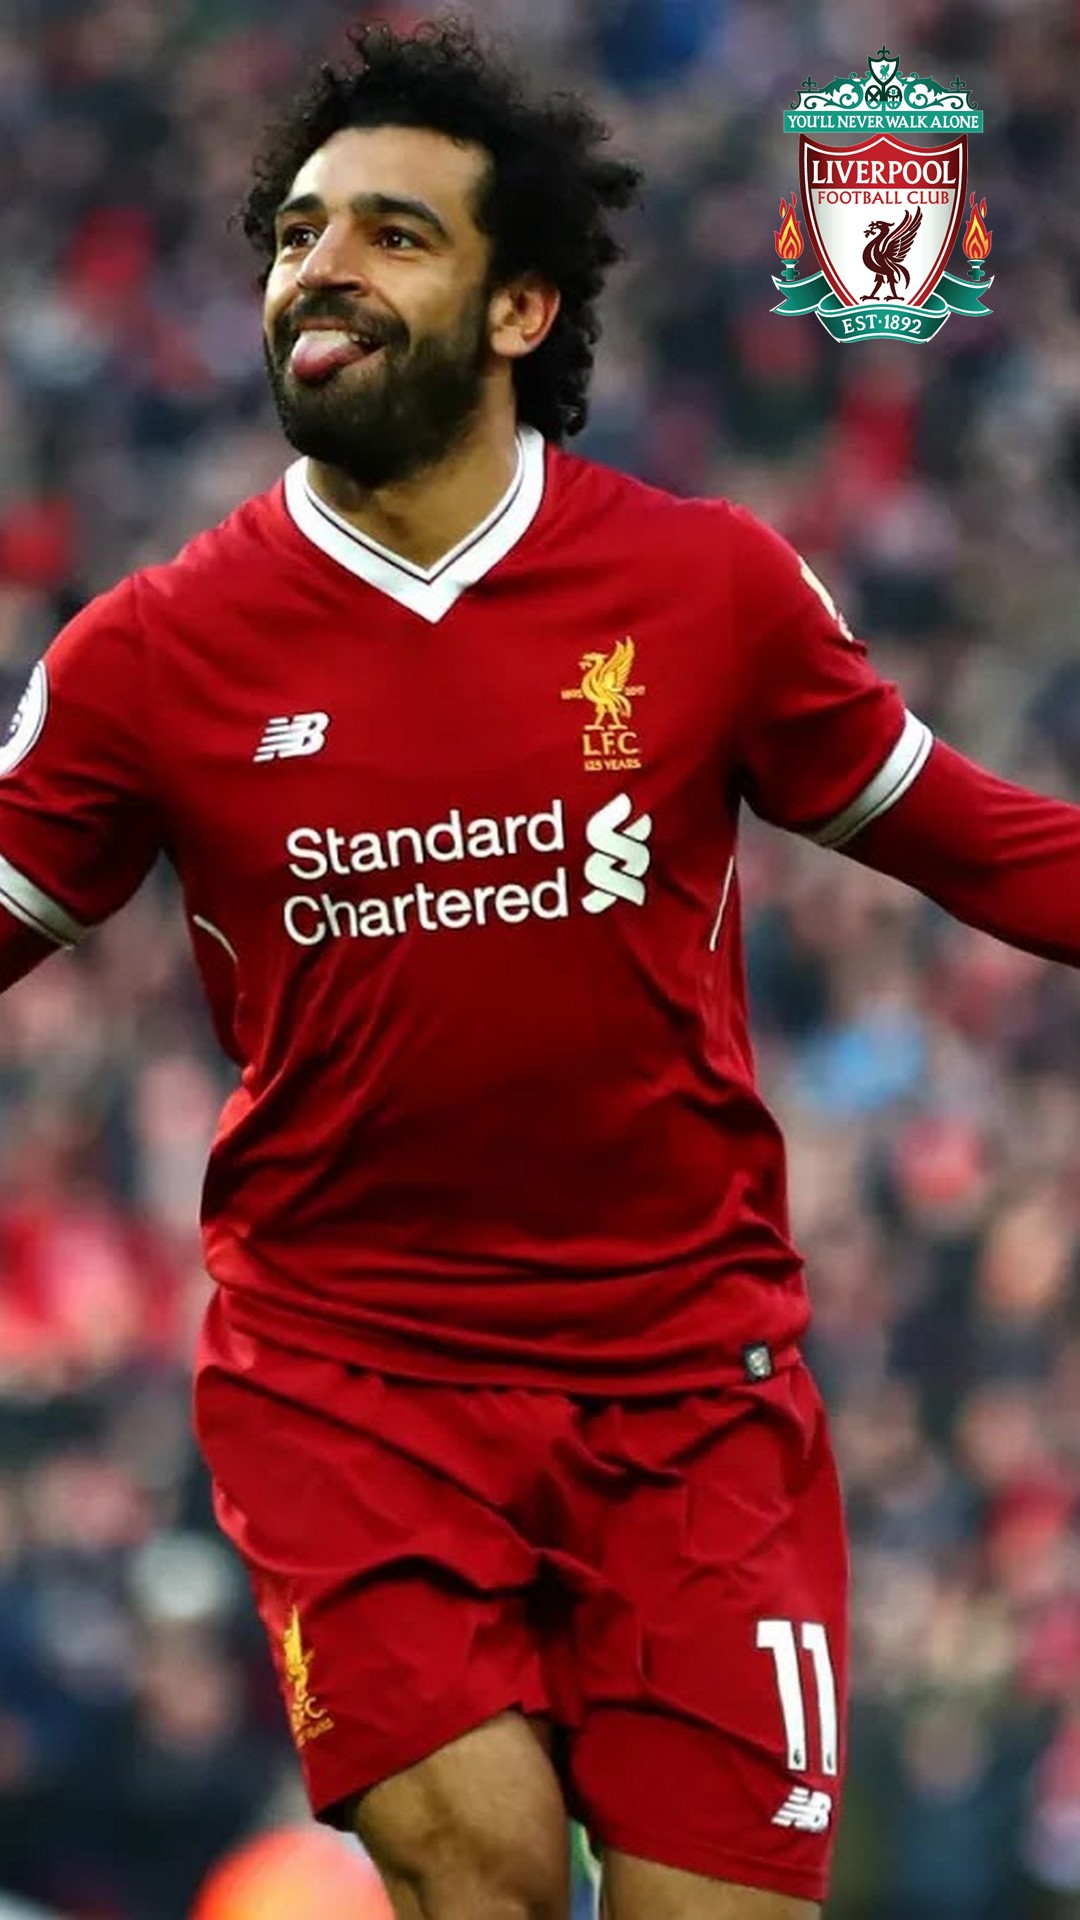 Mo Salah Android Wallpaper with image resolution 1080x1920 pixel. You can make this wallpaper for your Android backgrounds, Tablet, Smartphones Screensavers and Mobile Phone Lock Screen